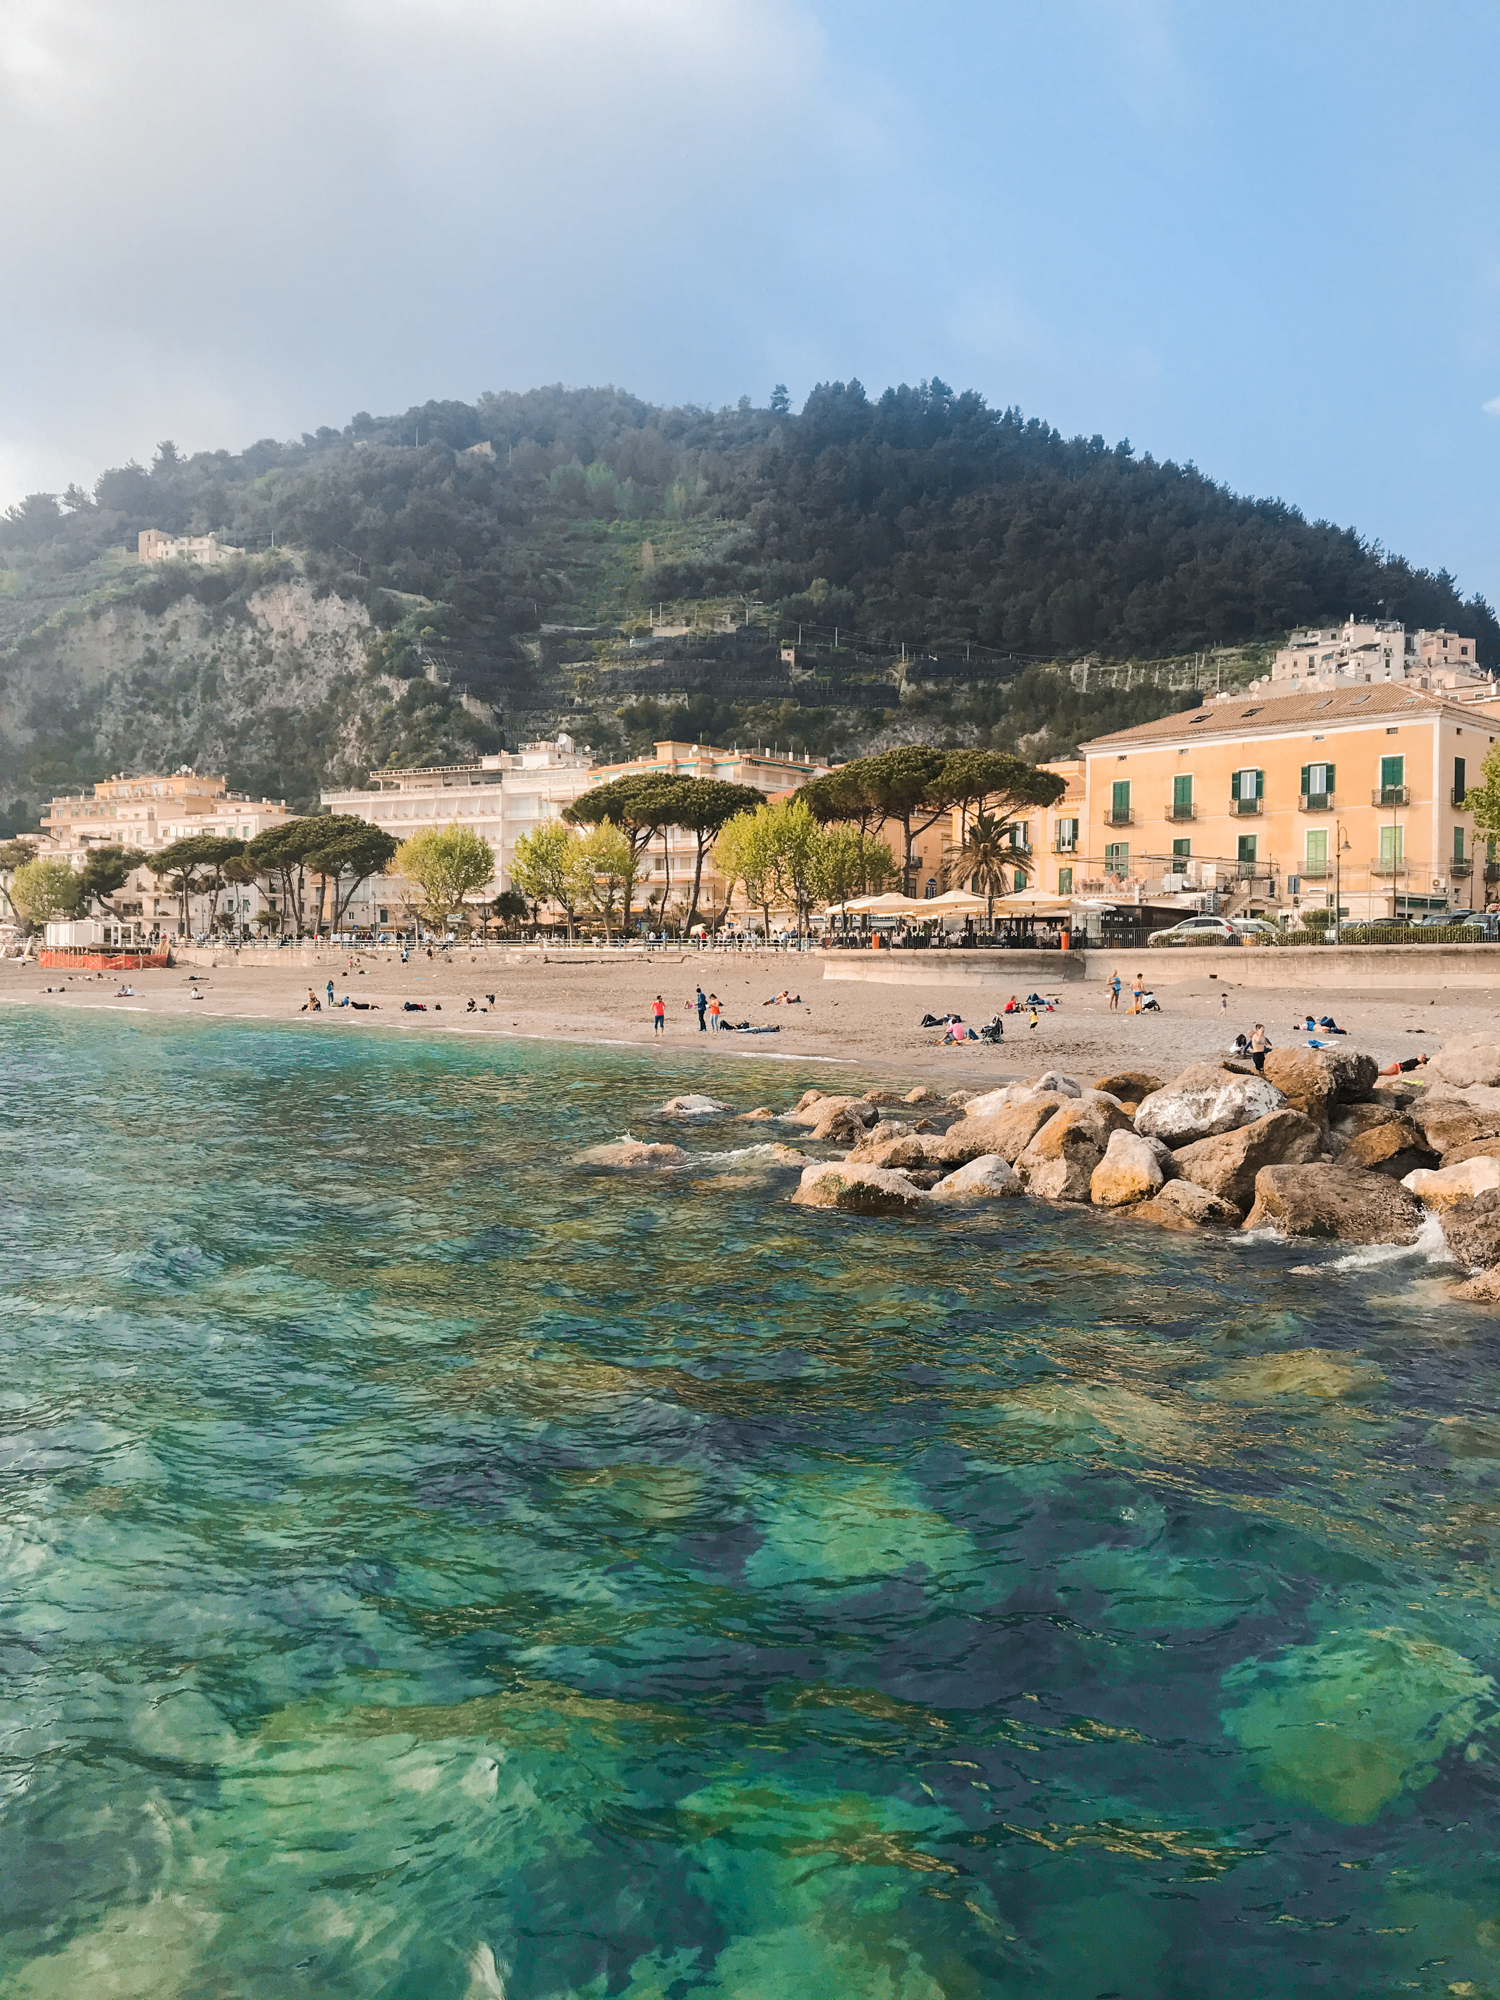 How to see the Amalfi Coast and avoid tourists, Maiori – from California to Italy by Corey Marshall